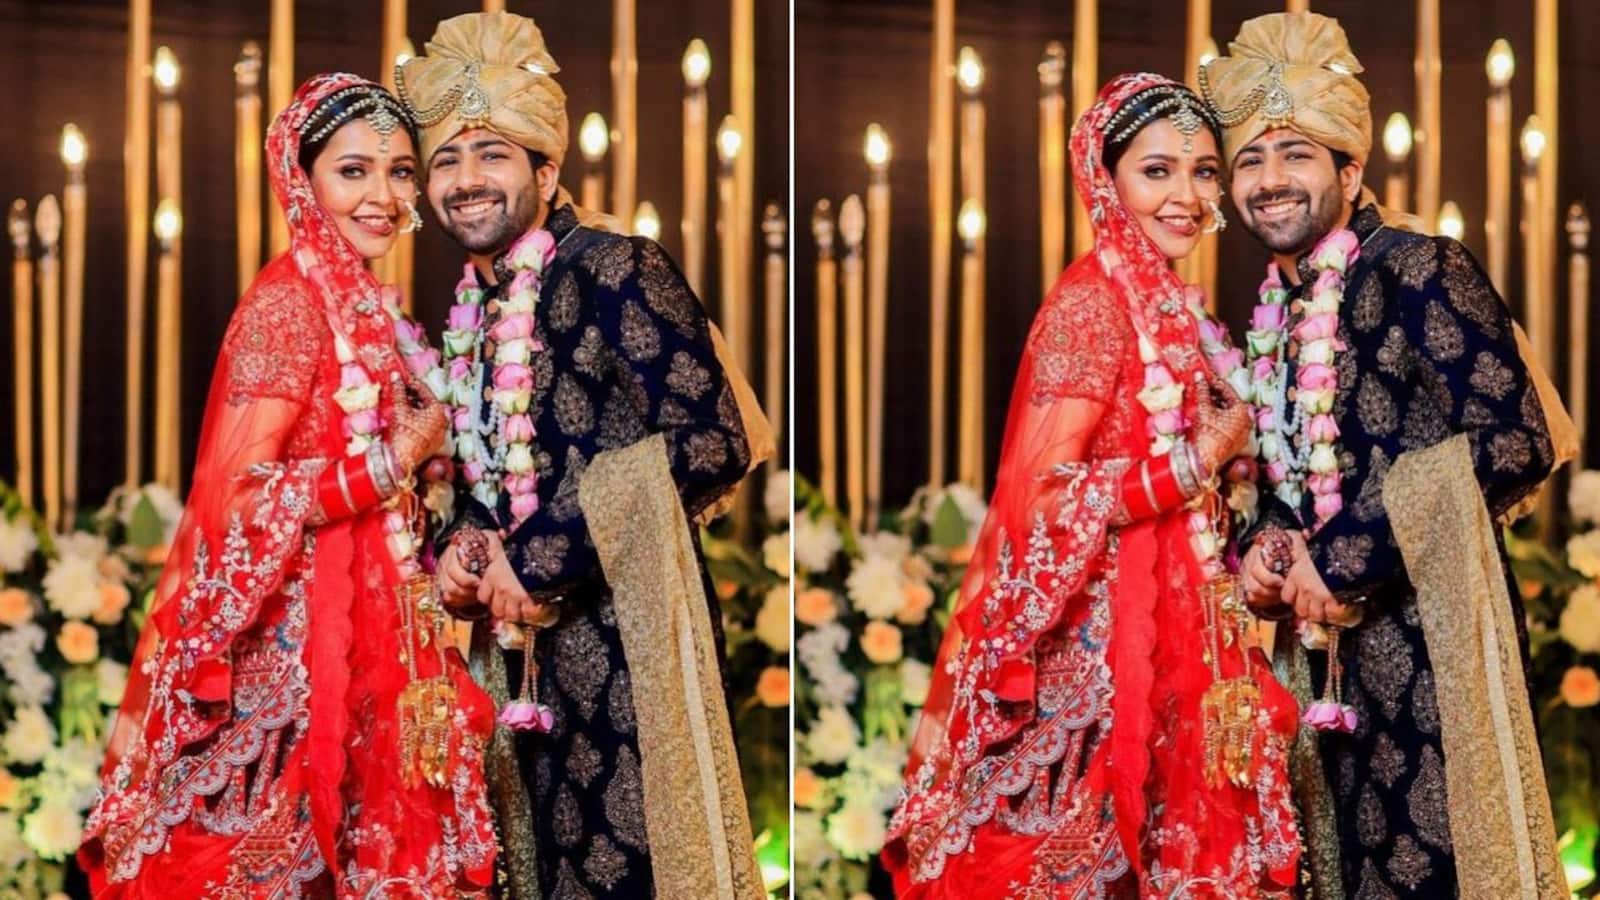 Mansi Srivastava – Kapil Tejwani wedding: Here’s what we know about the groom